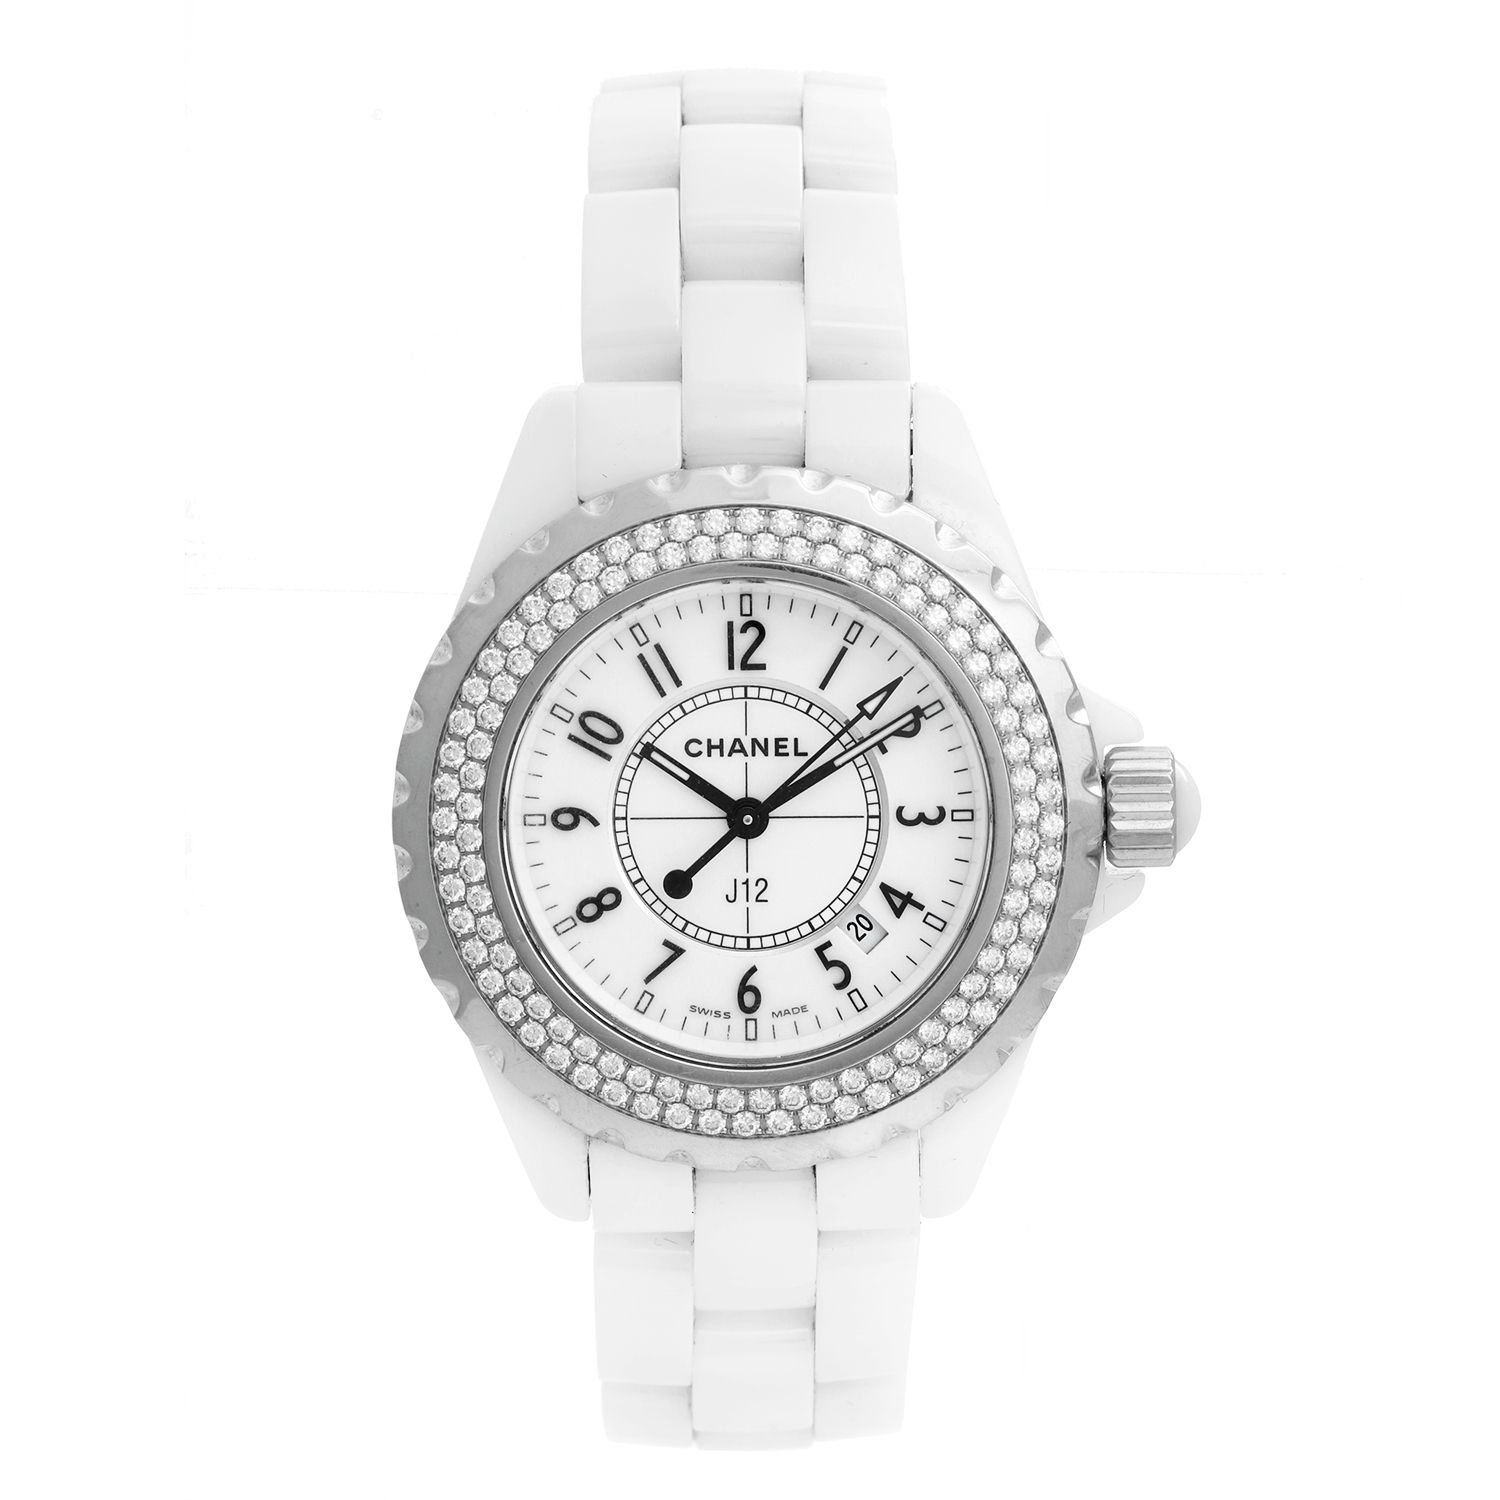 Chanel J12 Automatic Ceramic White 38mm Factory Diamonds for 4 500 for  sale from a Private Seller on Chrono24